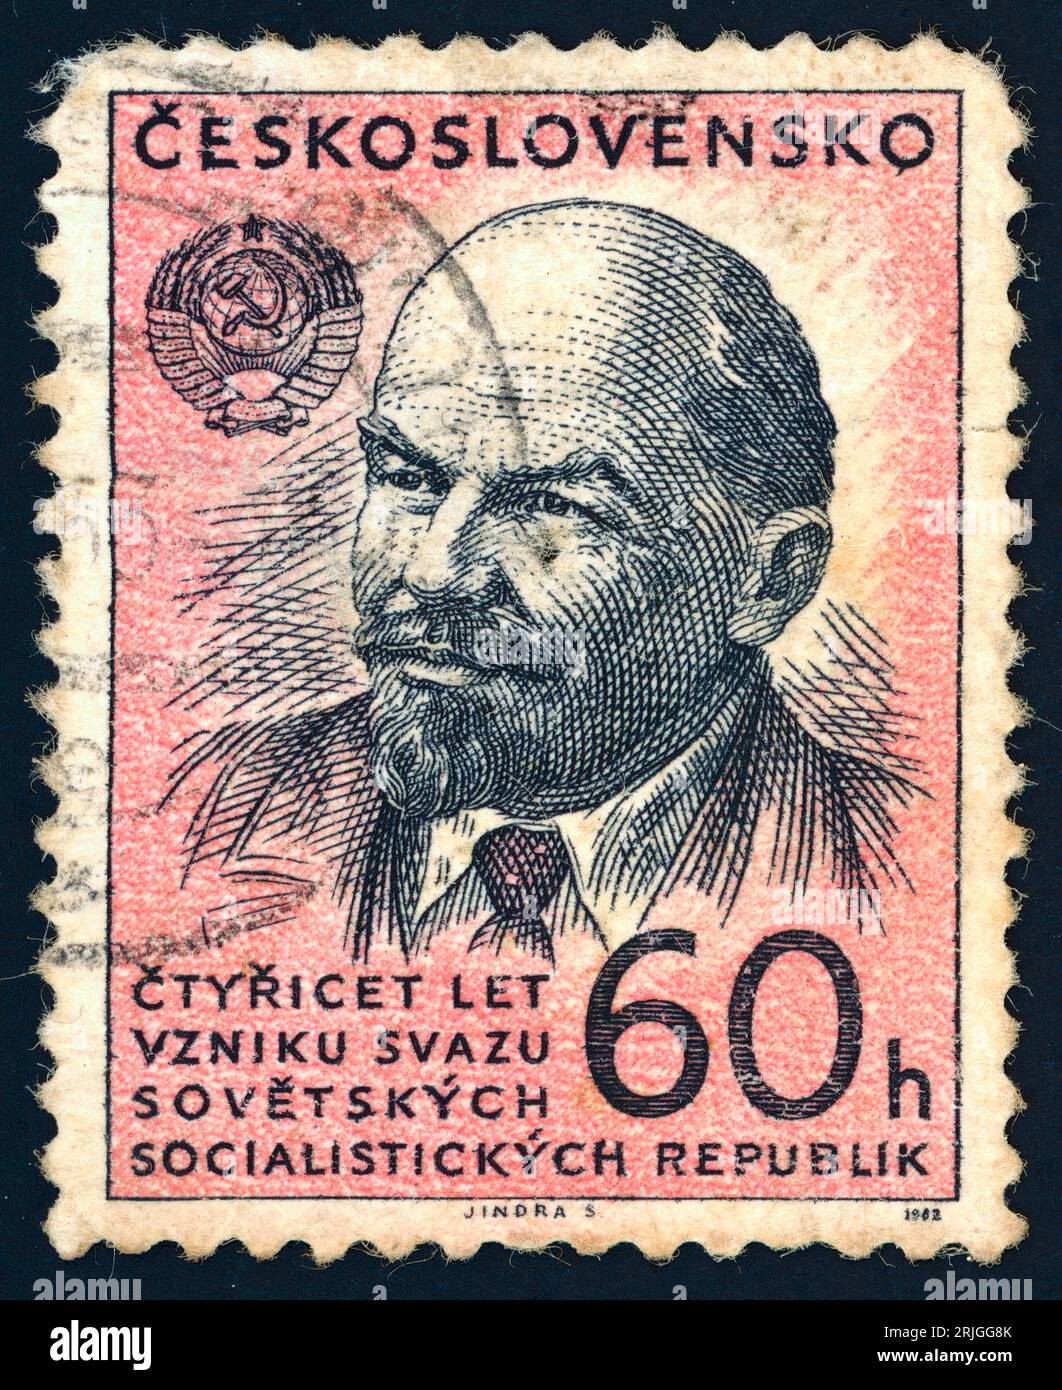 Vladimir Ilich Lenin. Postage stamp issued in Czechoslovakia in 1962 on the occasion of the 40th anniversary of the foundation of the USSR. Vladimir Lenin, also called Vladimir Ilich Lenin, original name Vladimir Ilich Ulyanov, (1870 – 1924), was the founder of the Russian Communist Party (Bolsheviks), inspirer and leader of the Bolshevik Revolution (1917), and the architect, builder, and first head (1917–24) of the Soviet state. Stock Photo